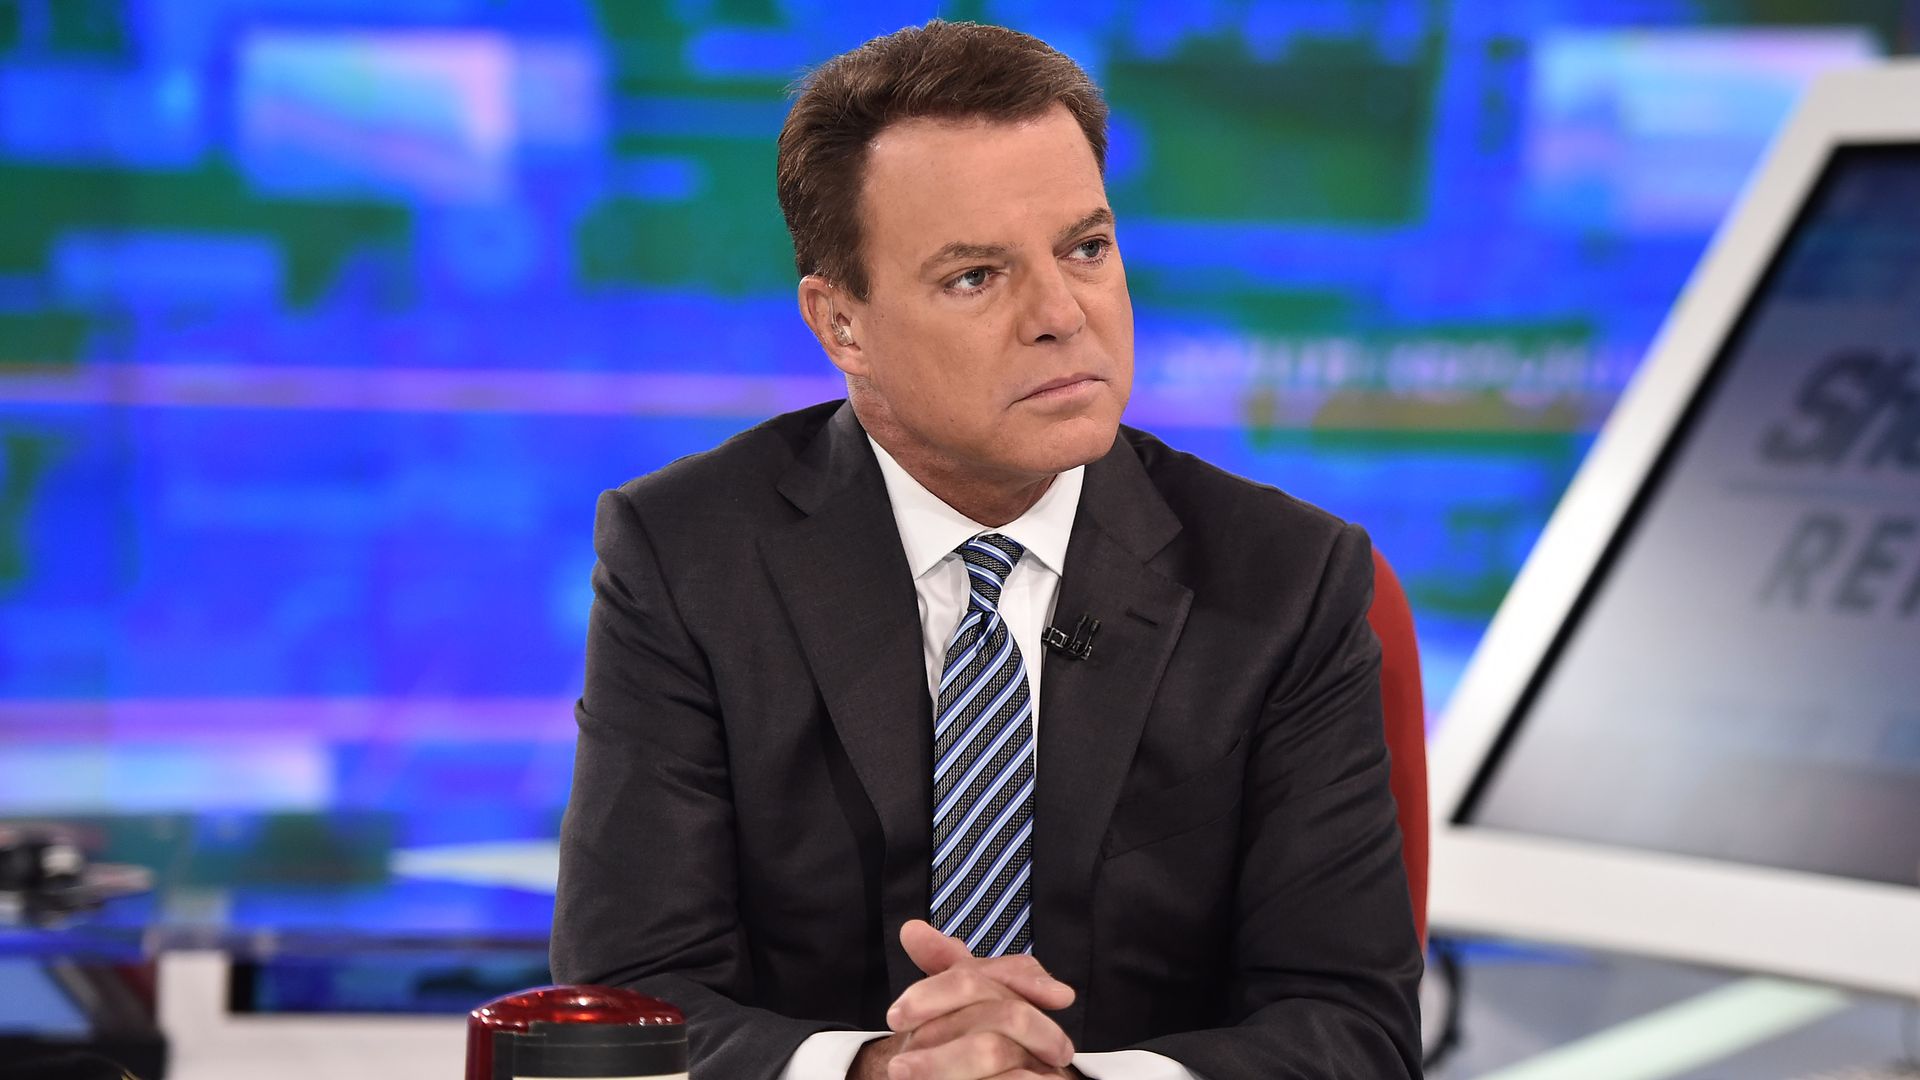 Shepard Smith sits in a suit and tie 